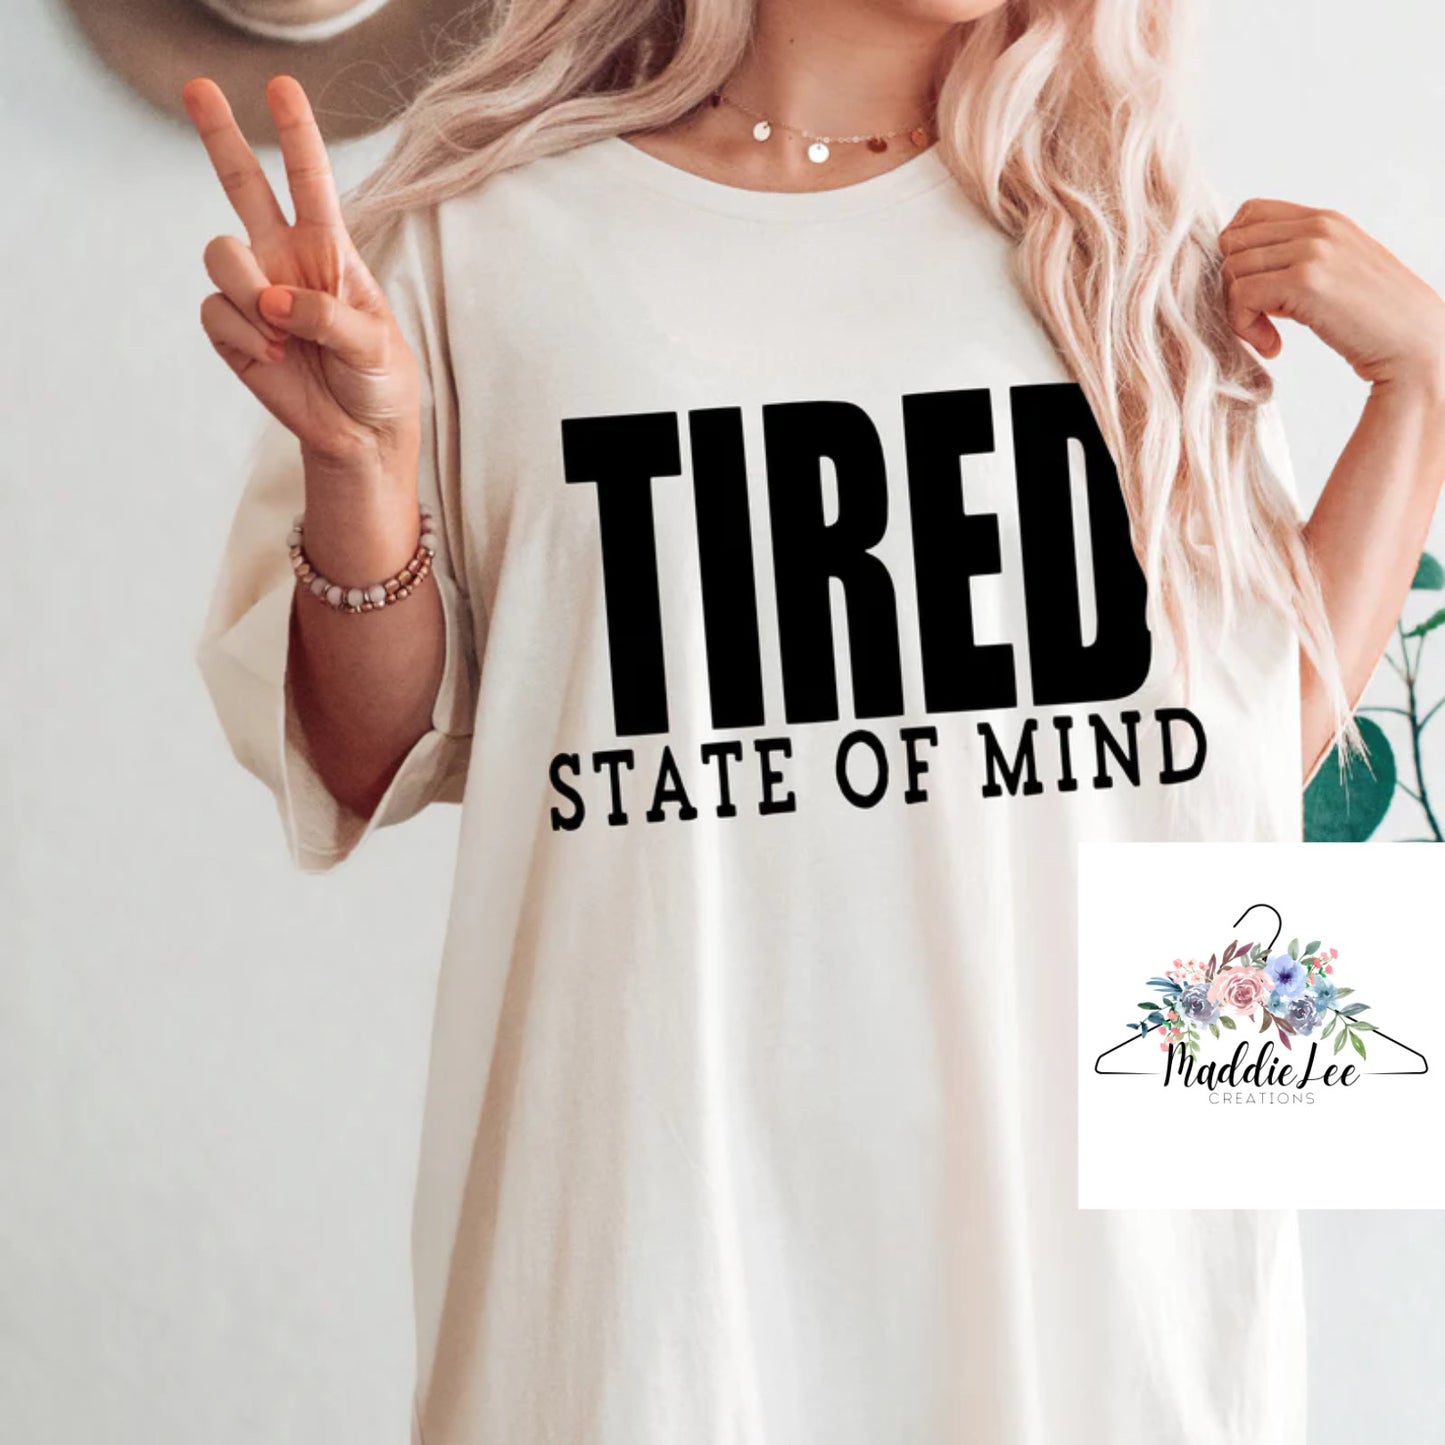 Tired State of Mind Adult Tee